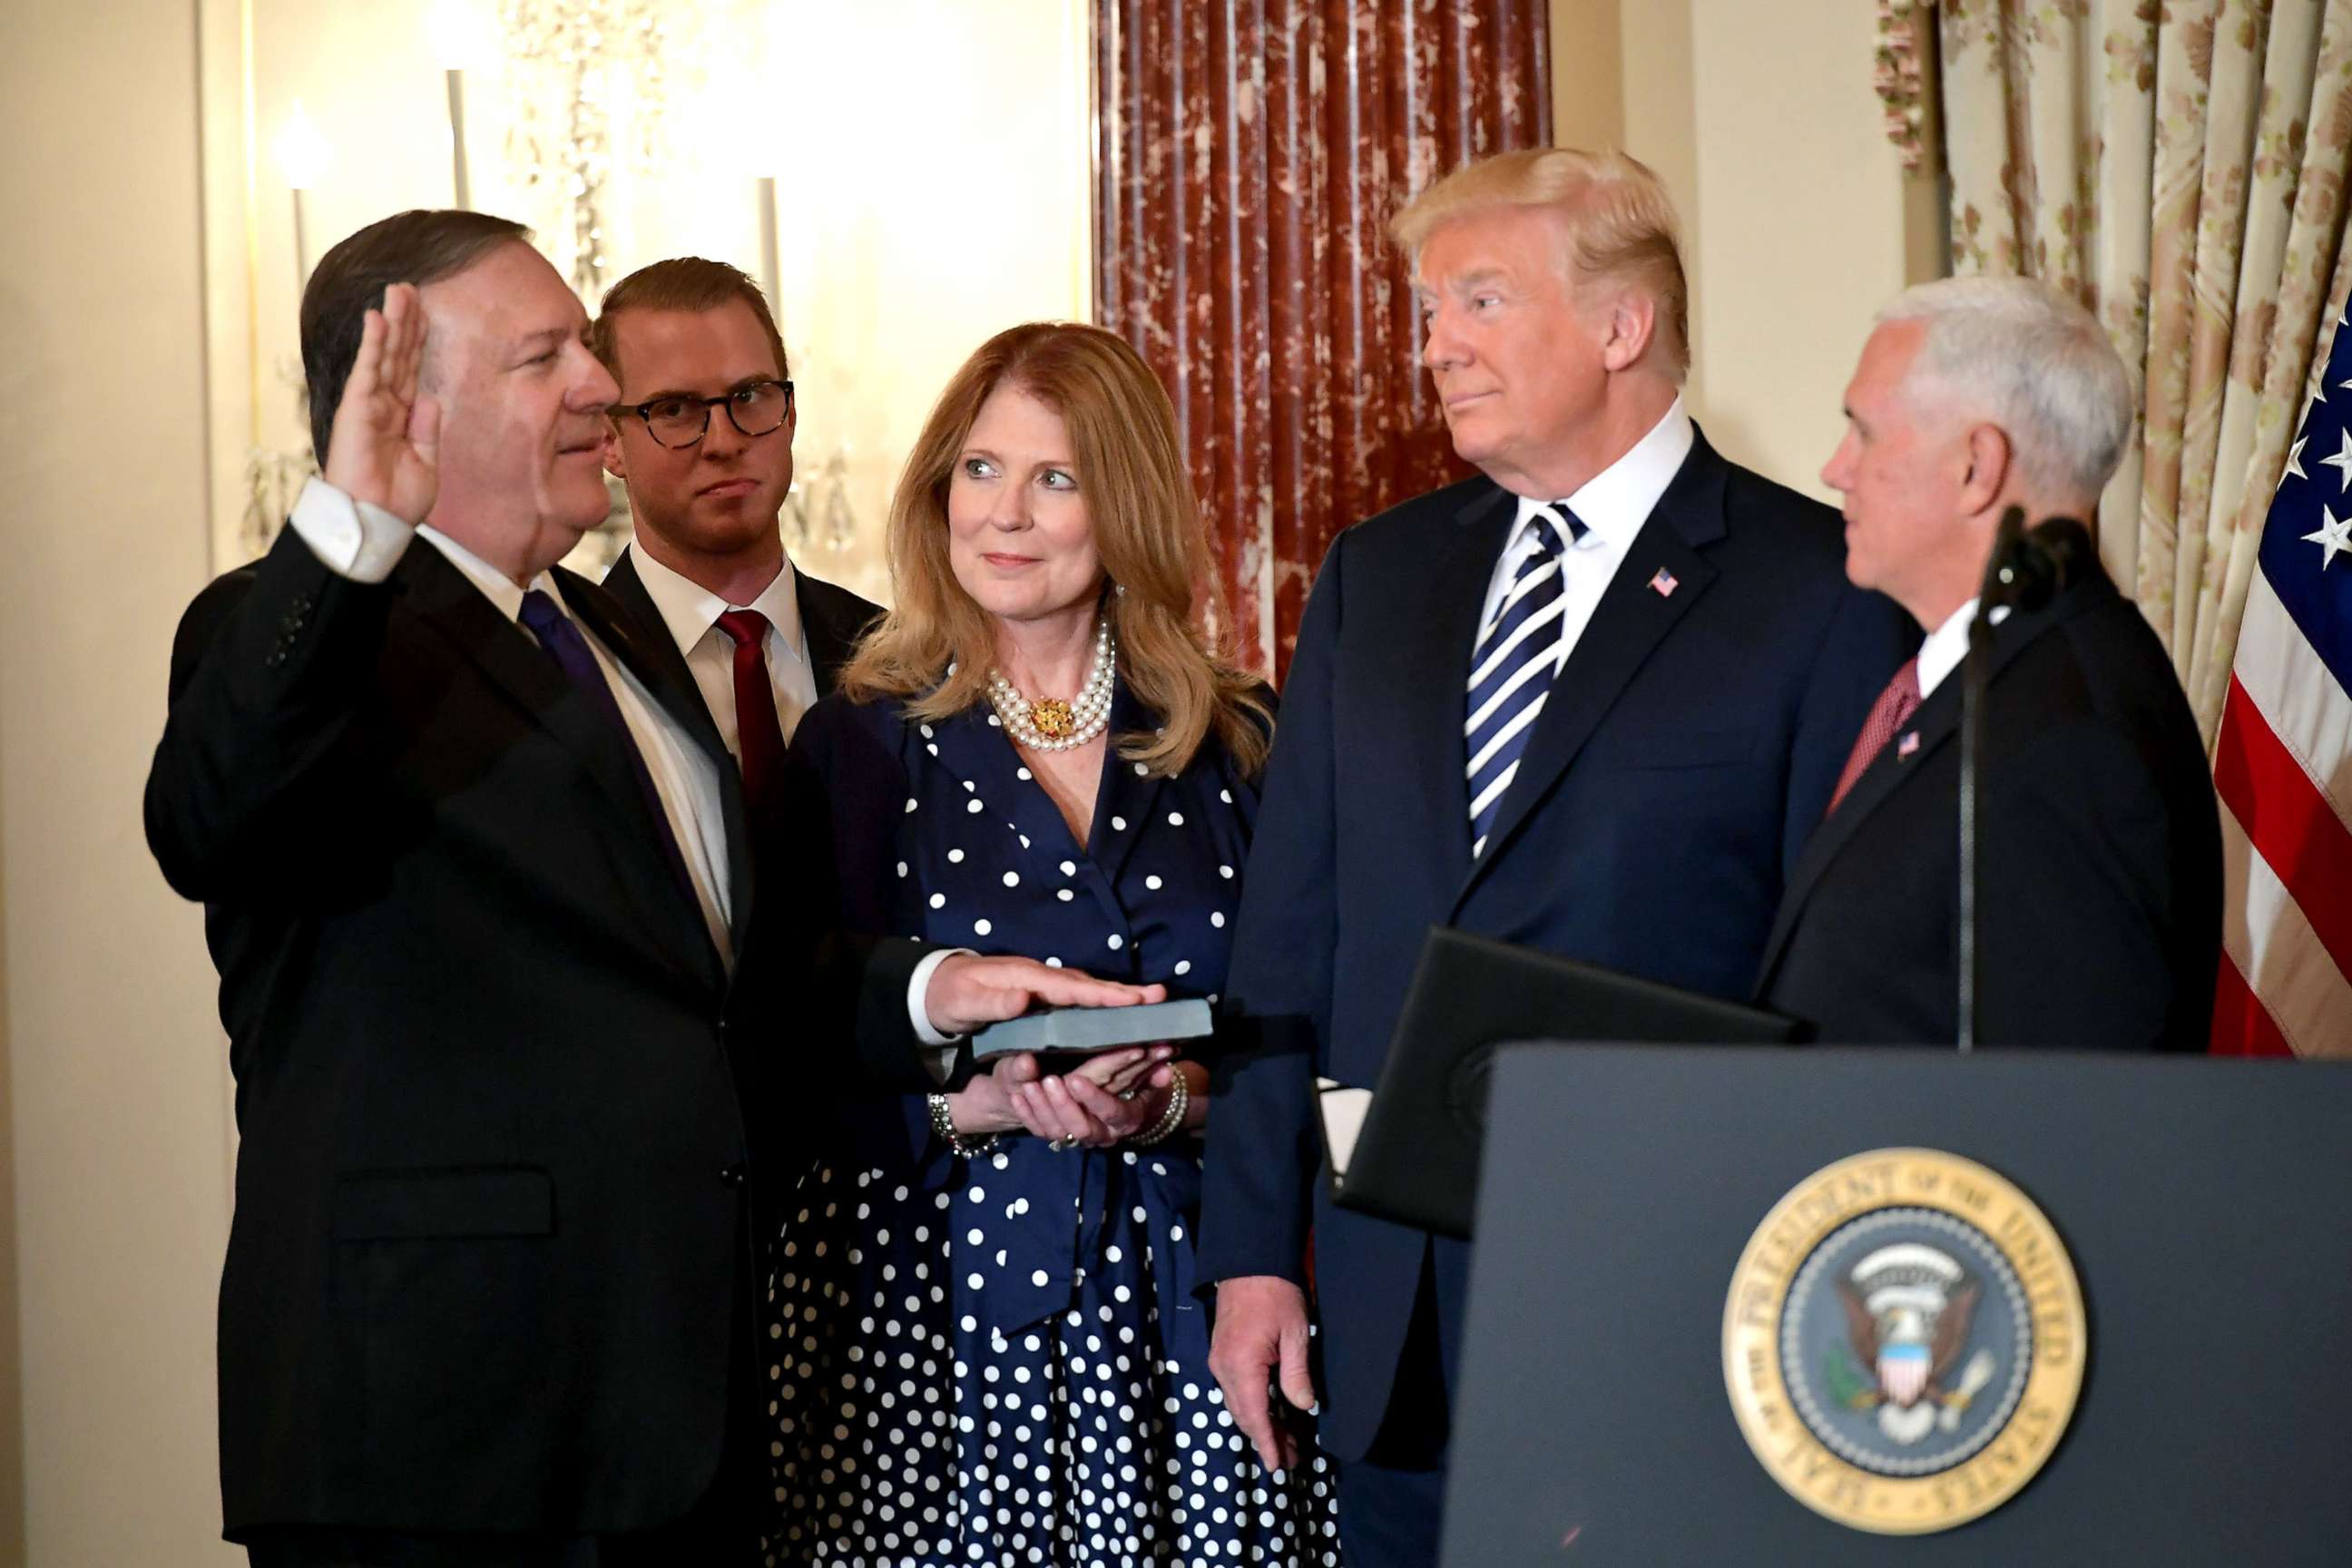 PHOTO: President Donald Trump watches Mike Pompeo take the oath during his ceremonial swearing-in as US Secretary of State, as Susan Pompeo, Nick Pompeo and US Vice President Mike Pence look on in Washington, DC, May 2, 2018.